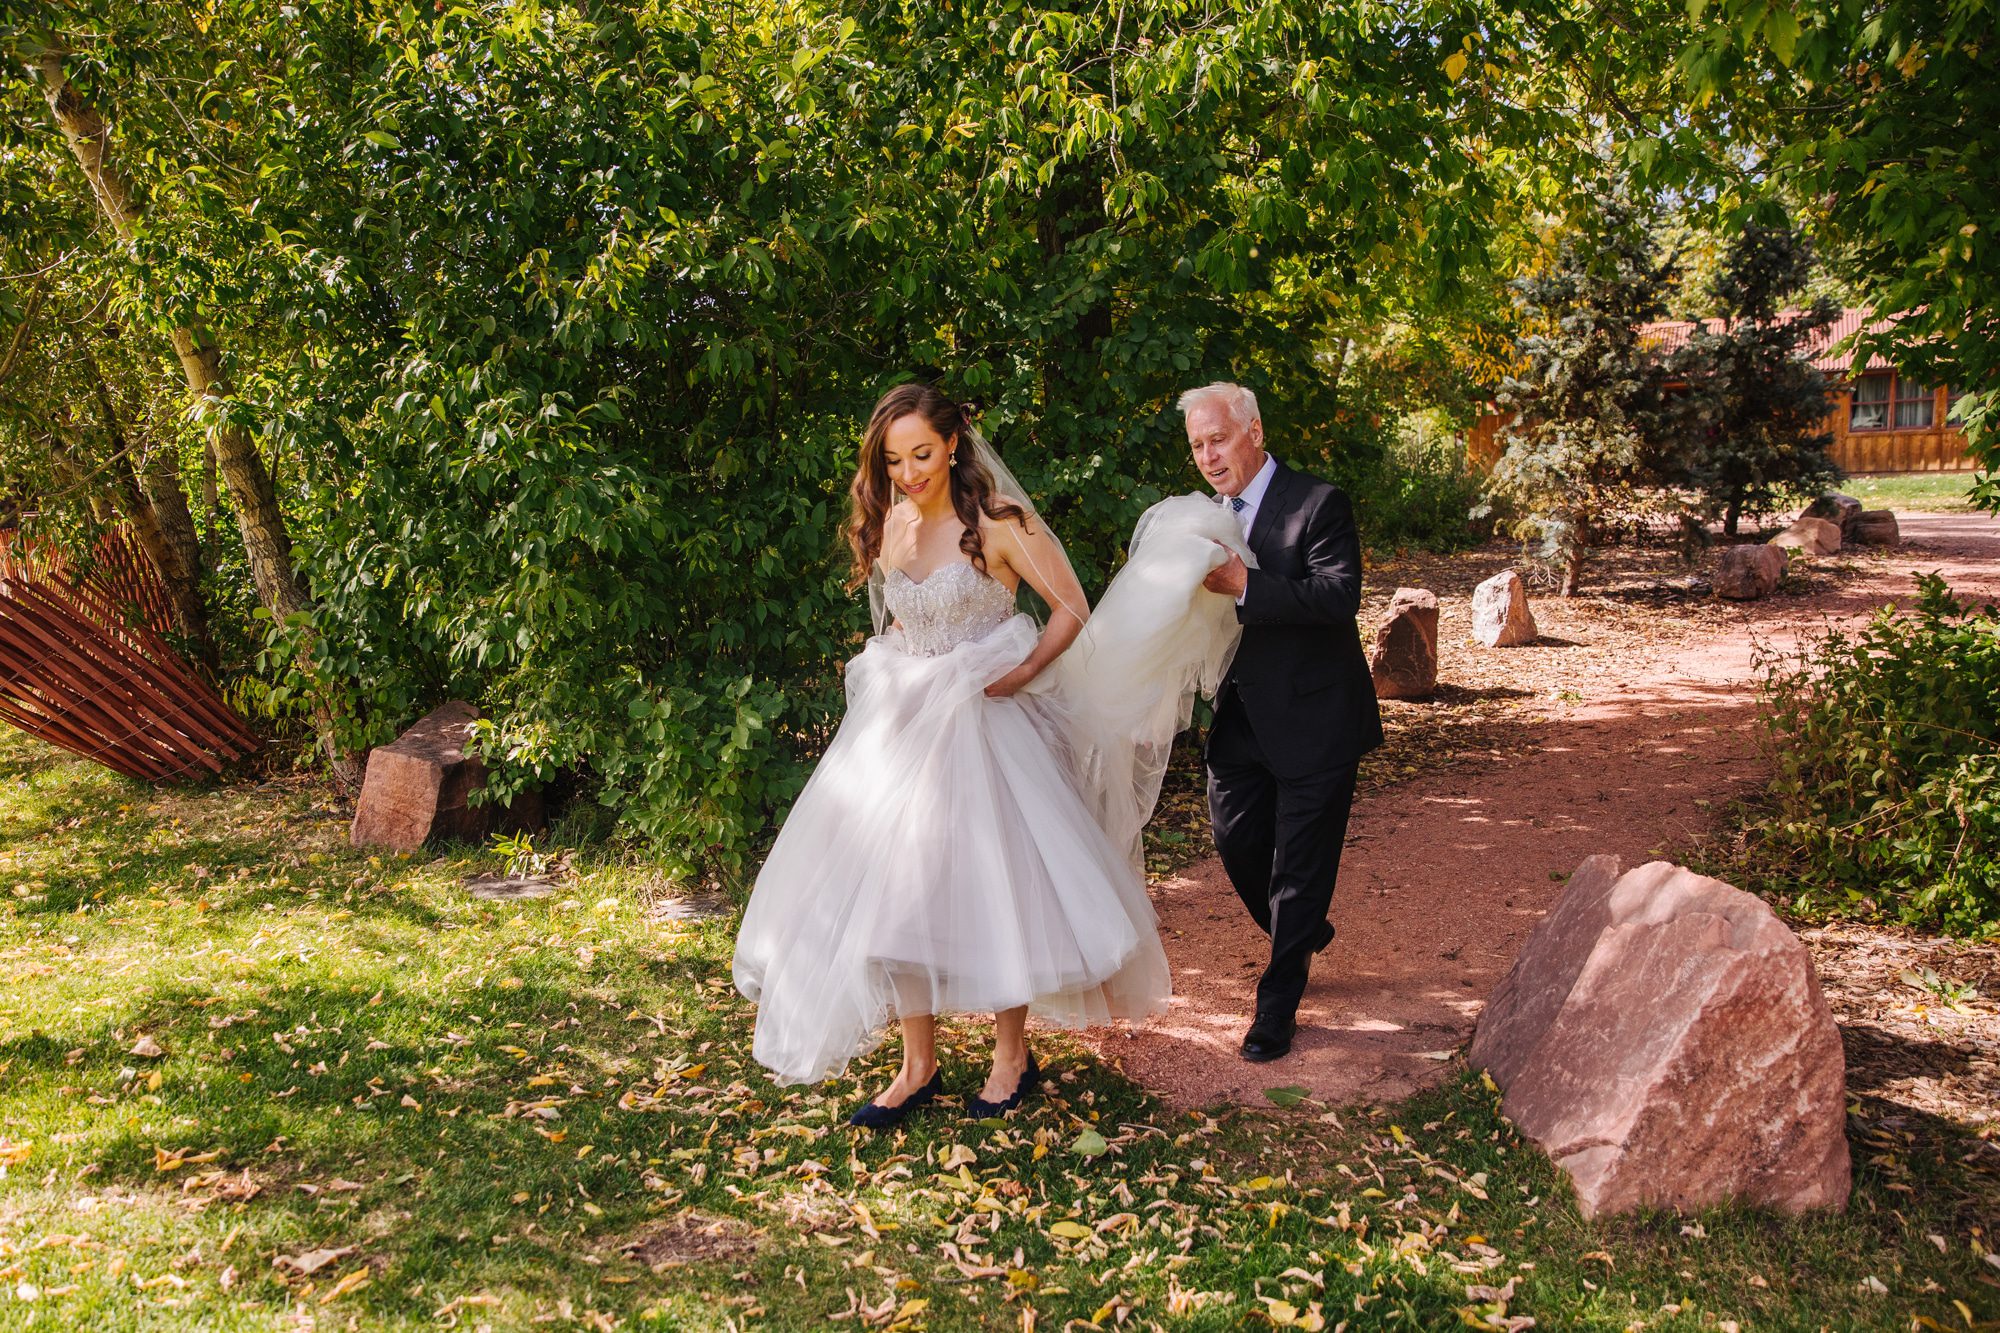 planet bluegrass wedding, lyons wedding venue, outdoor wedding venue in colorado, summer wedding, colorado wedding venue, bride with dad, bride and father, daddy daughter moment, dad and daughter wedding, tule wedding dress, strapless wedding dress, beaded top wedding dress